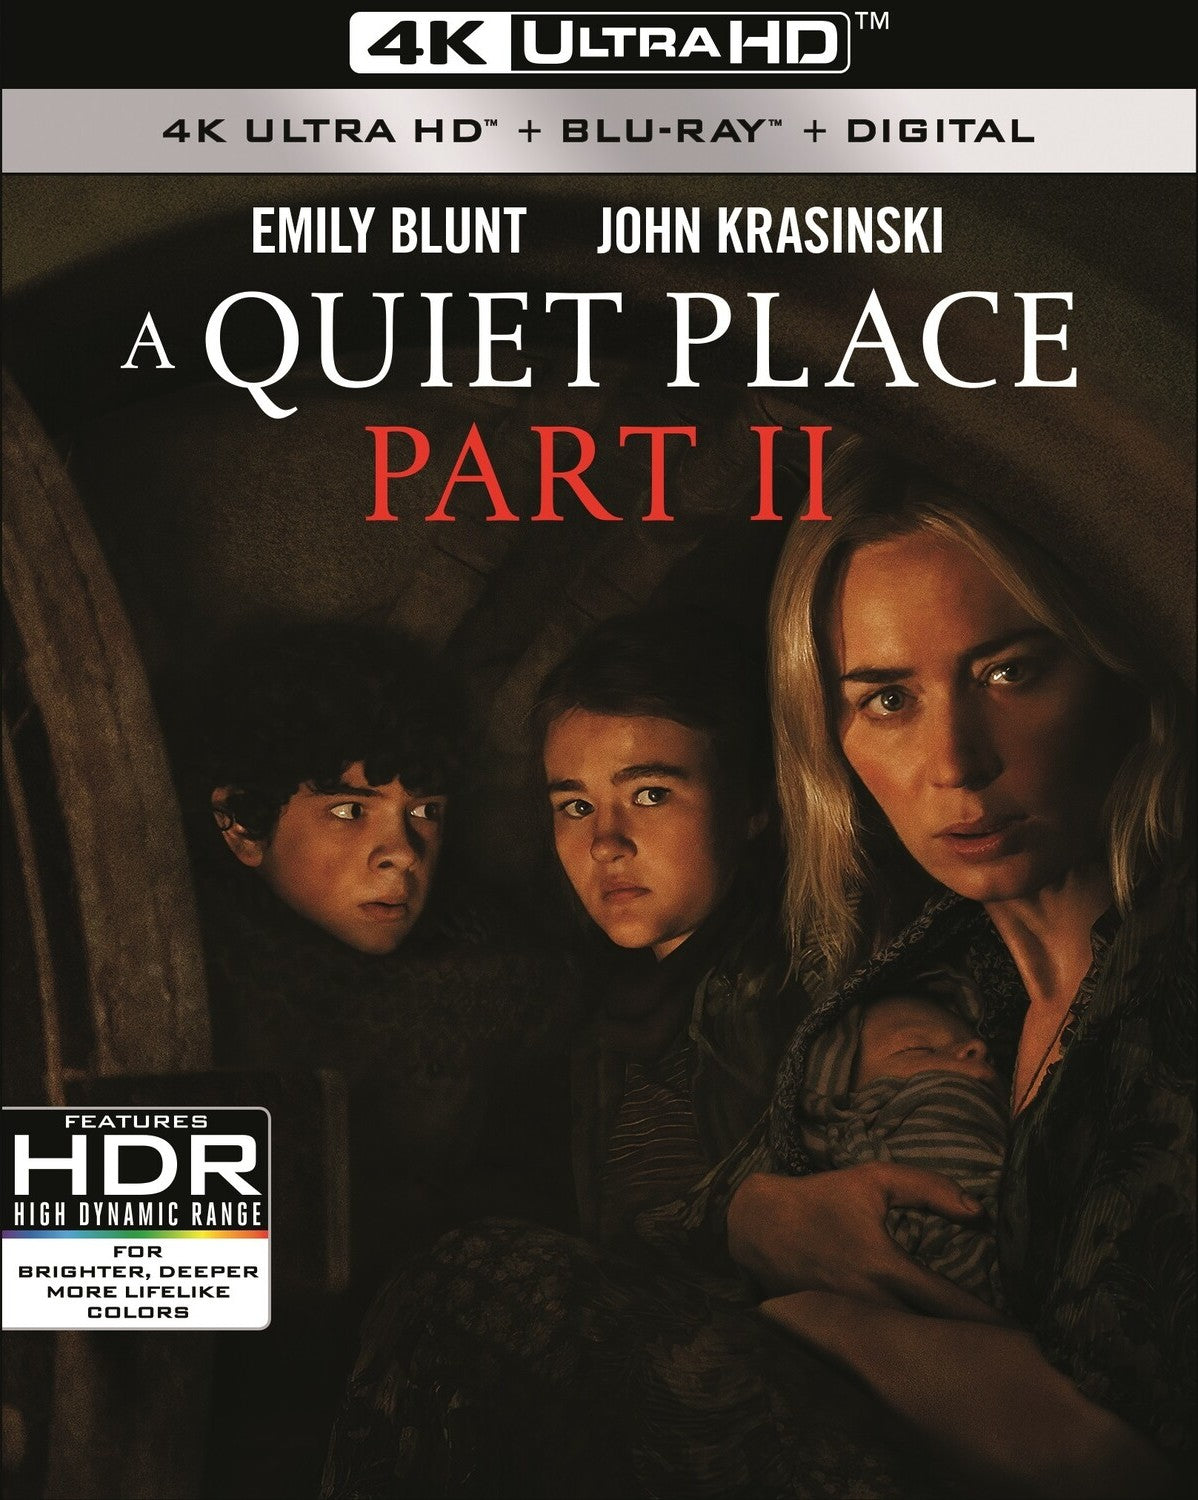 A QUIET PLACE PART II 4K UHD/BLU-RAY